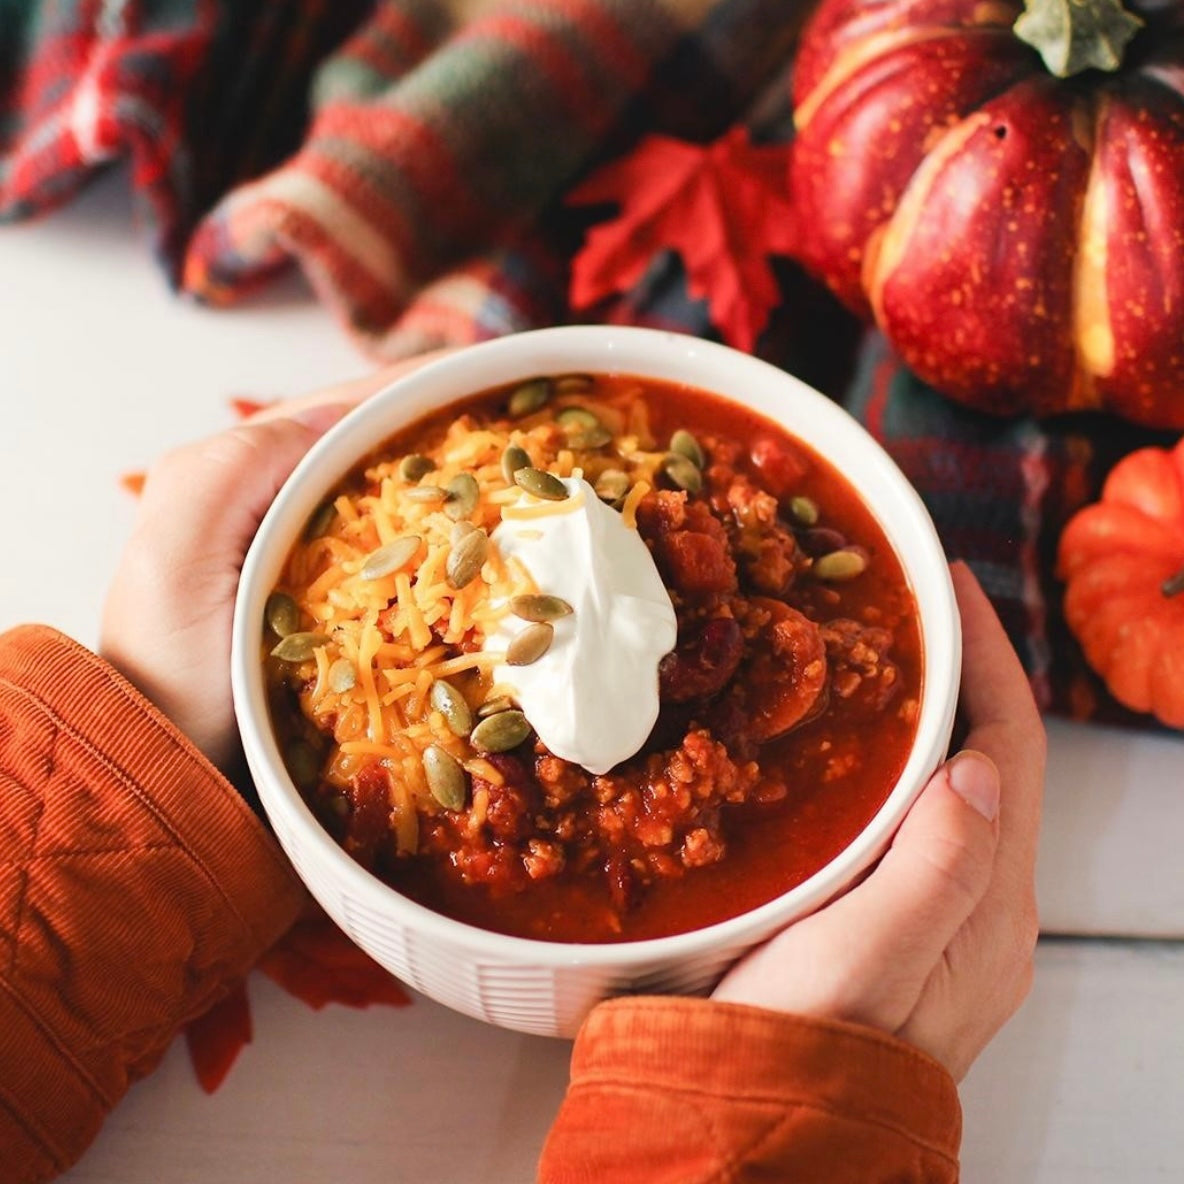 Hands holding a bowl of Pedersons Ground Beef chili to warm up.